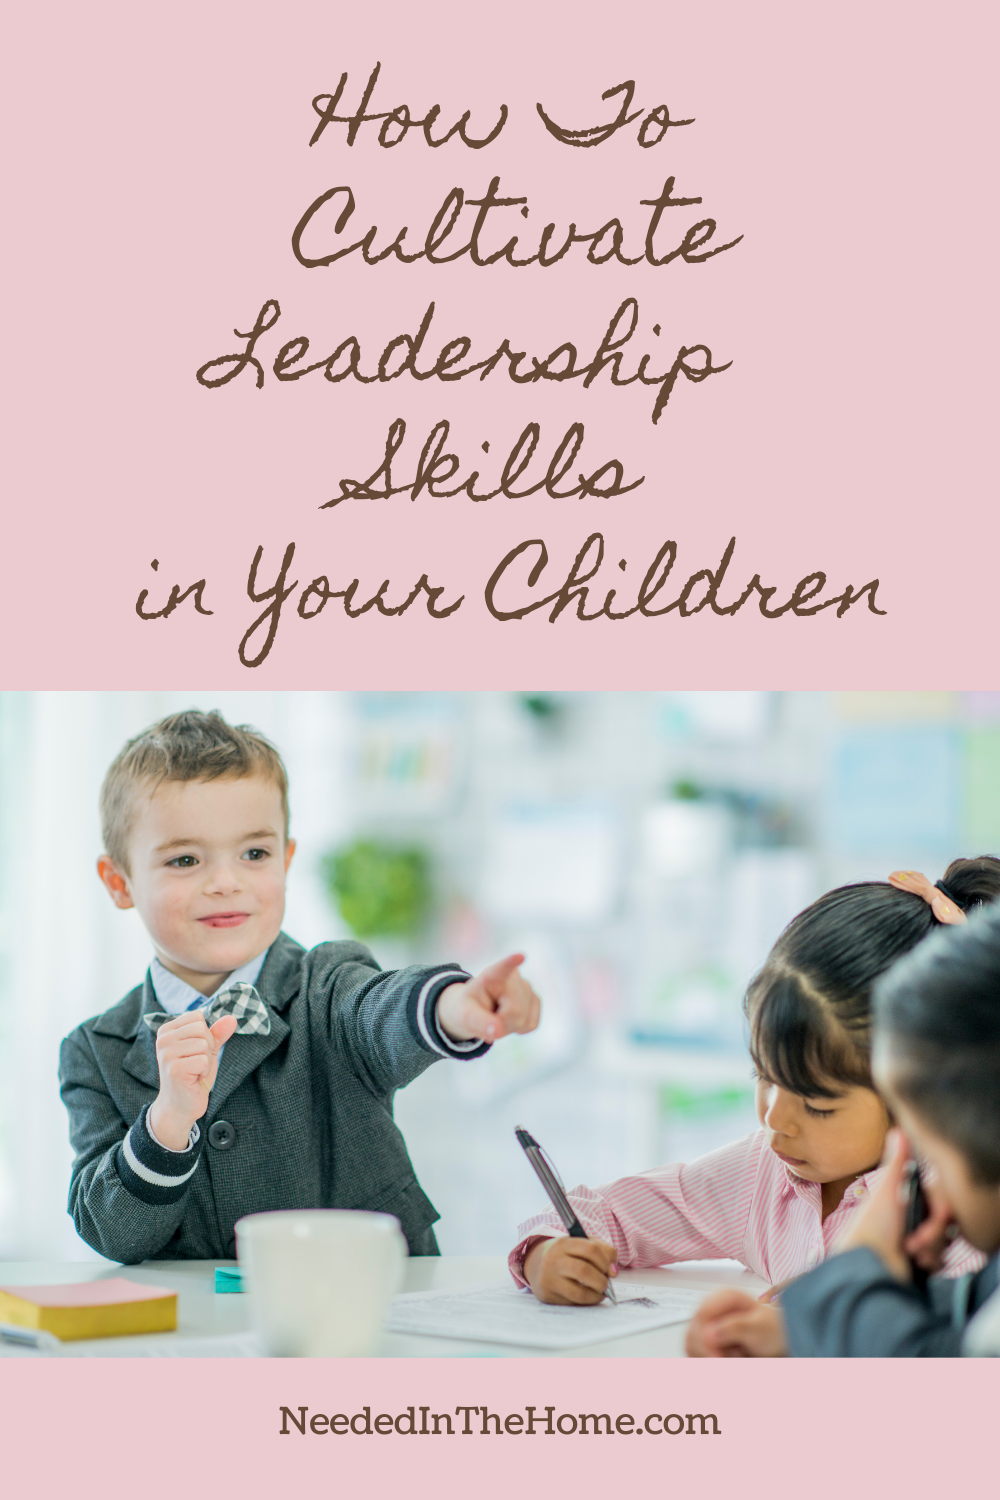 pinterest-pin-description how to cultivate leadership skills in your children neededinthehome